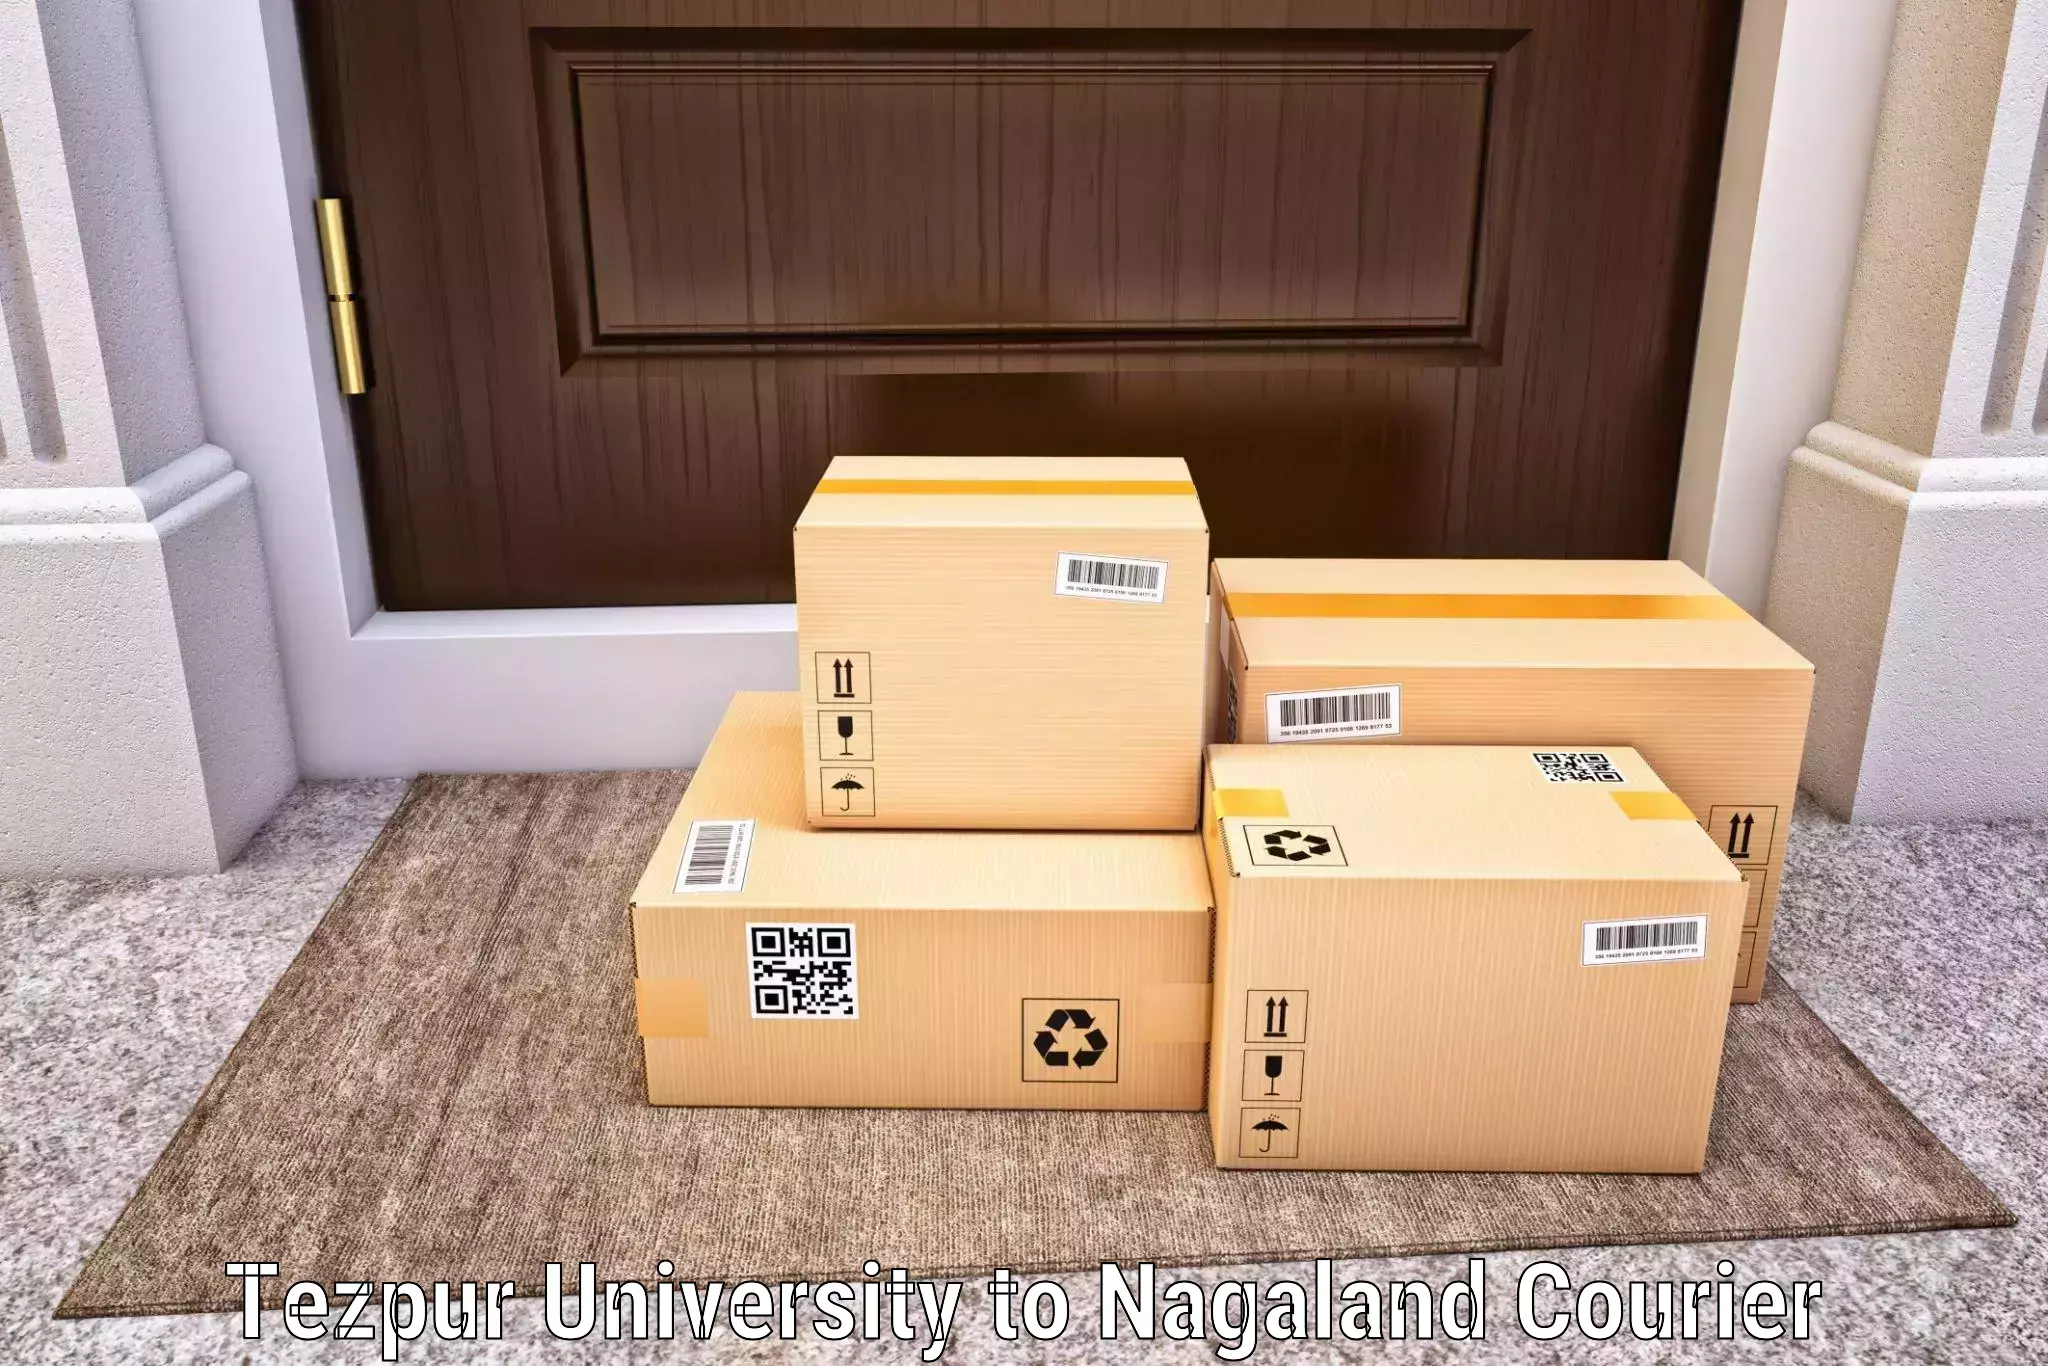 High-capacity courier solutions Tezpur University to Nagaland